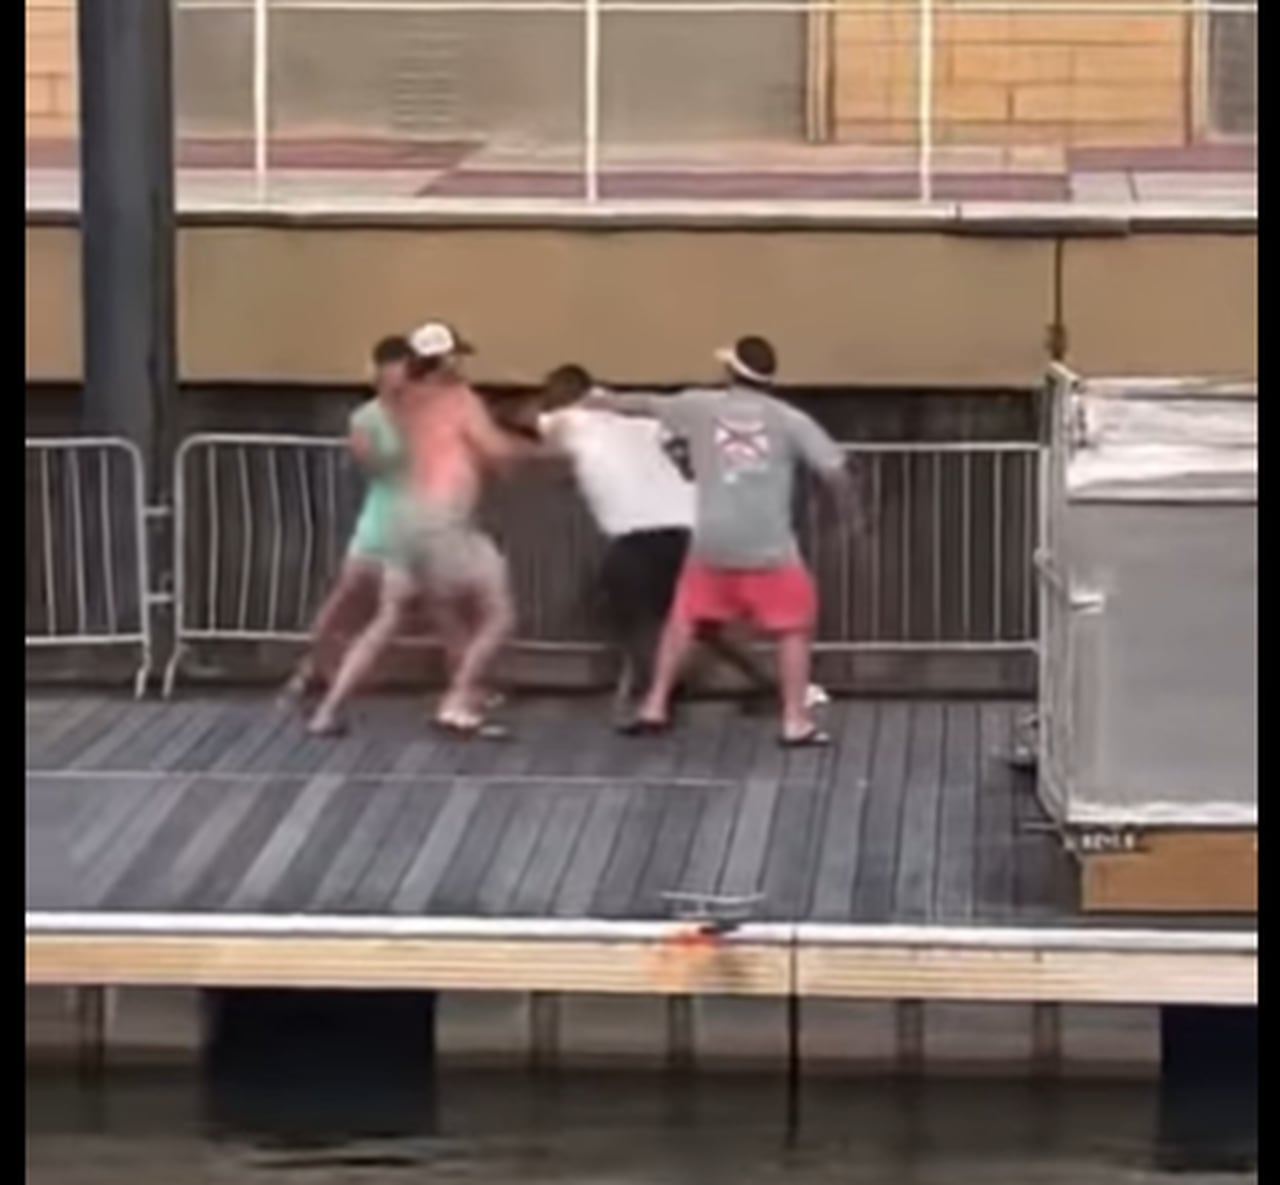 Riverboat co-captain pleads not guilty to assault in Montgomery riverfront brawl